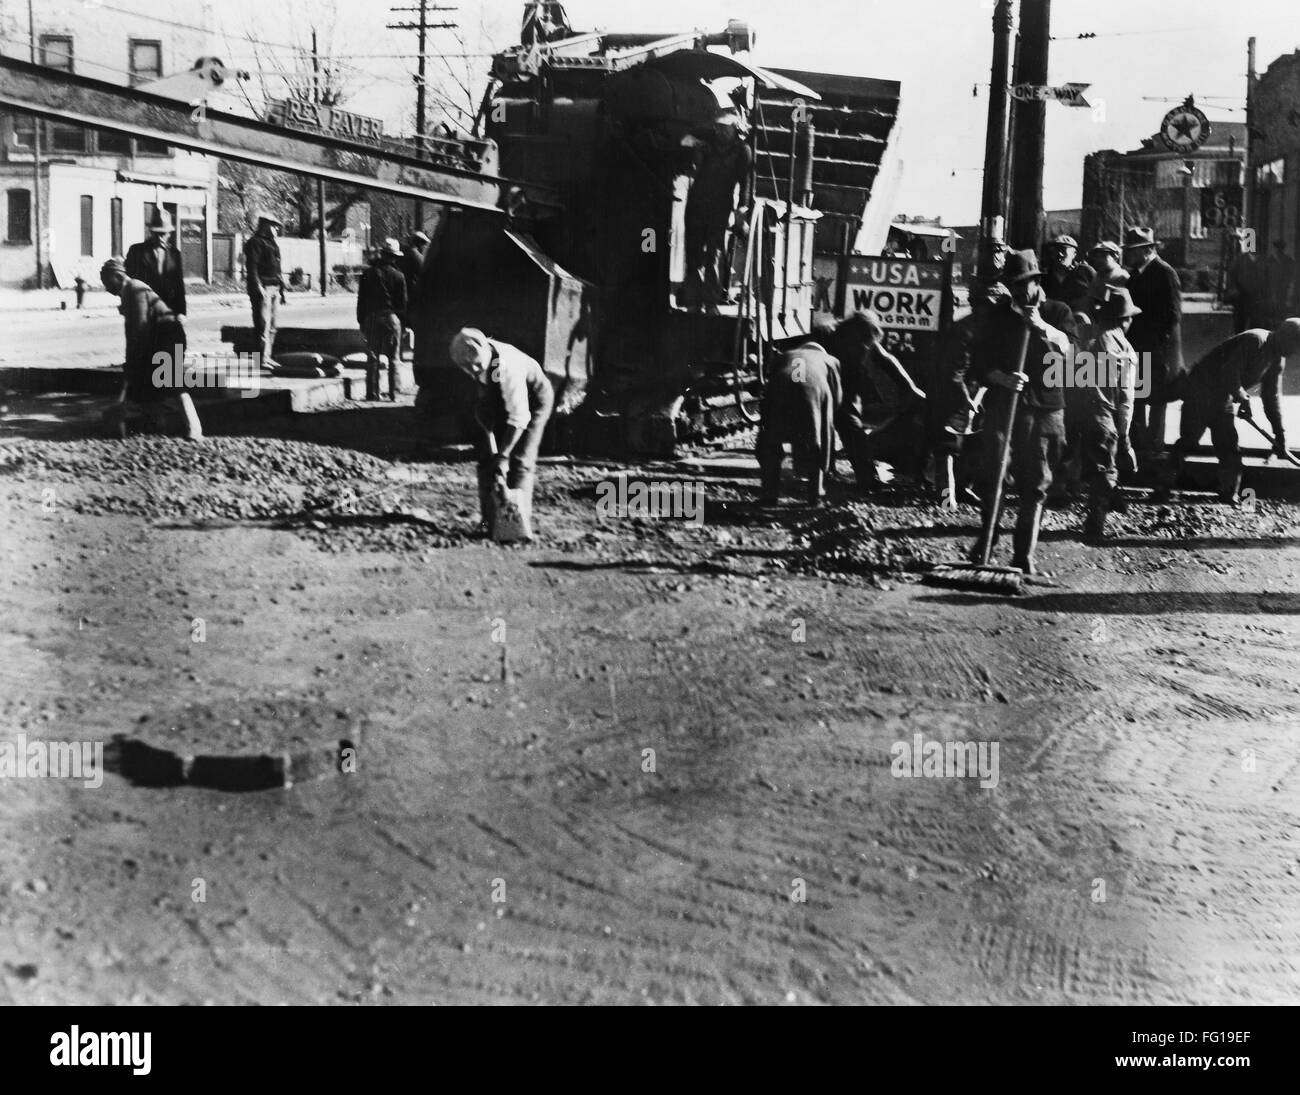 WPA: ROAD CONSTRUCTION. /nMen building a road in the Bronx, as part of a Works Progress Administration project. Photograph, 1936. Stock Photo